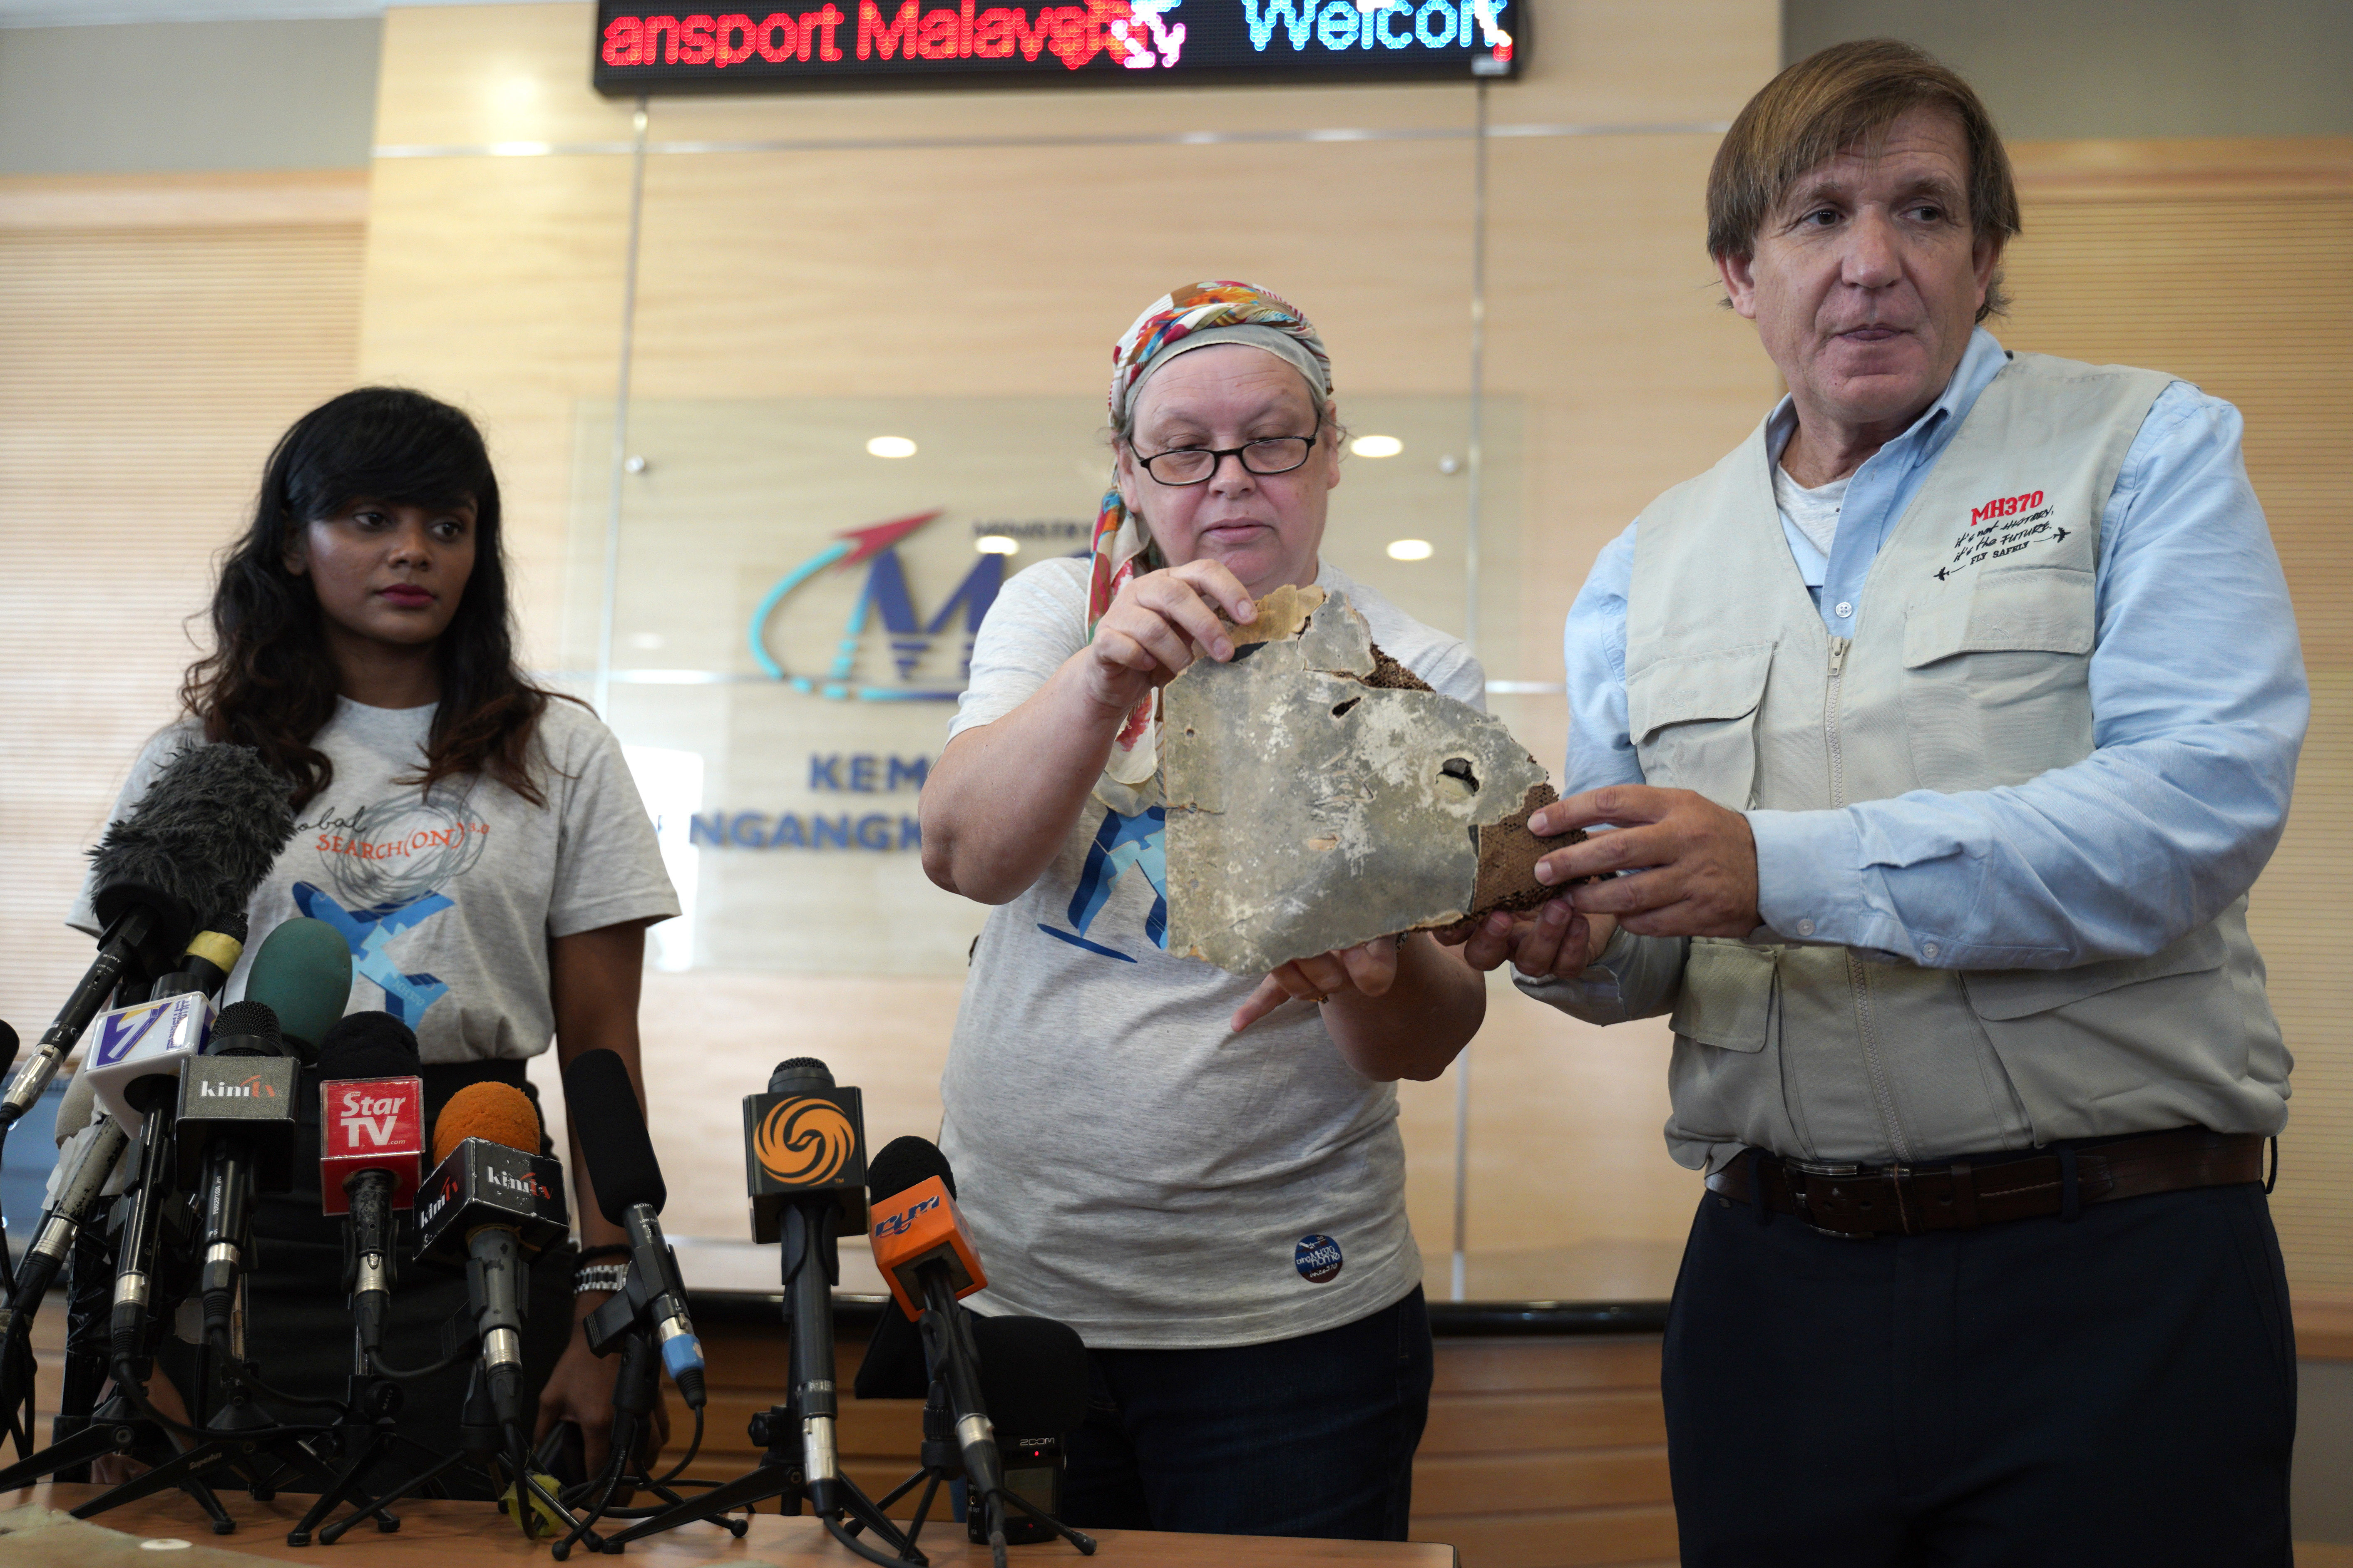 Jacquita Gomes, centre, wife of Patrick Gomes, the in-flight supervisor on the ill-fated Malaysia Airlines Flight 370, and Blaine Alan Gibson, right, a representative of the next of kin of MH370, show a piece of debris believed to be from missing plane MH370 at the Ministry of Transport in Putrajaya, Malaysia